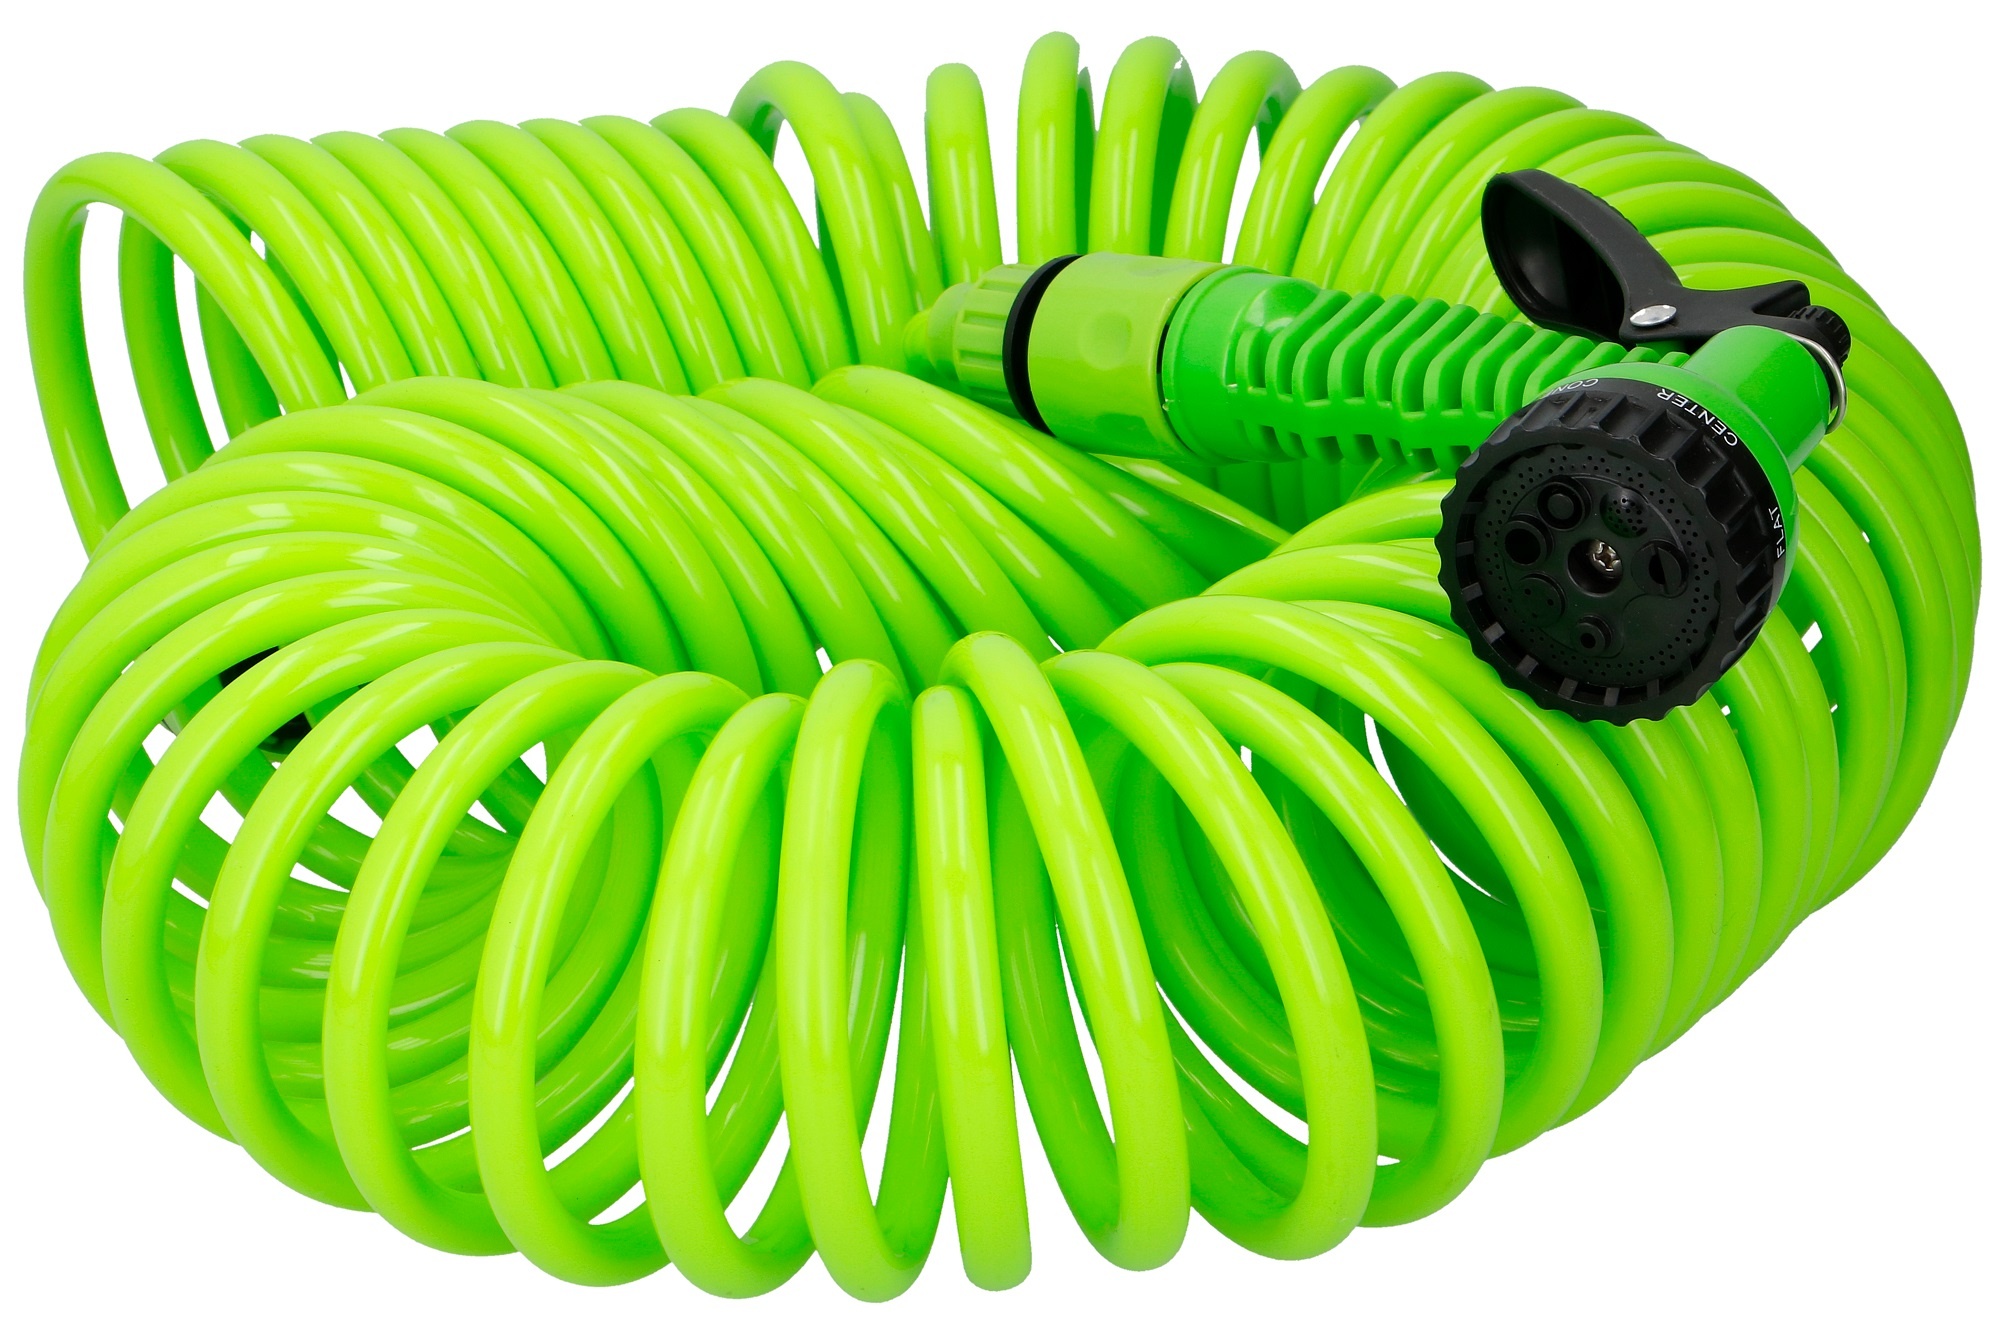 15m Flat Hose With Reel And 7 Dial Funcation Hose Nozzles, Yuyao Gaozhan  Garden Tools Co., Ltd.